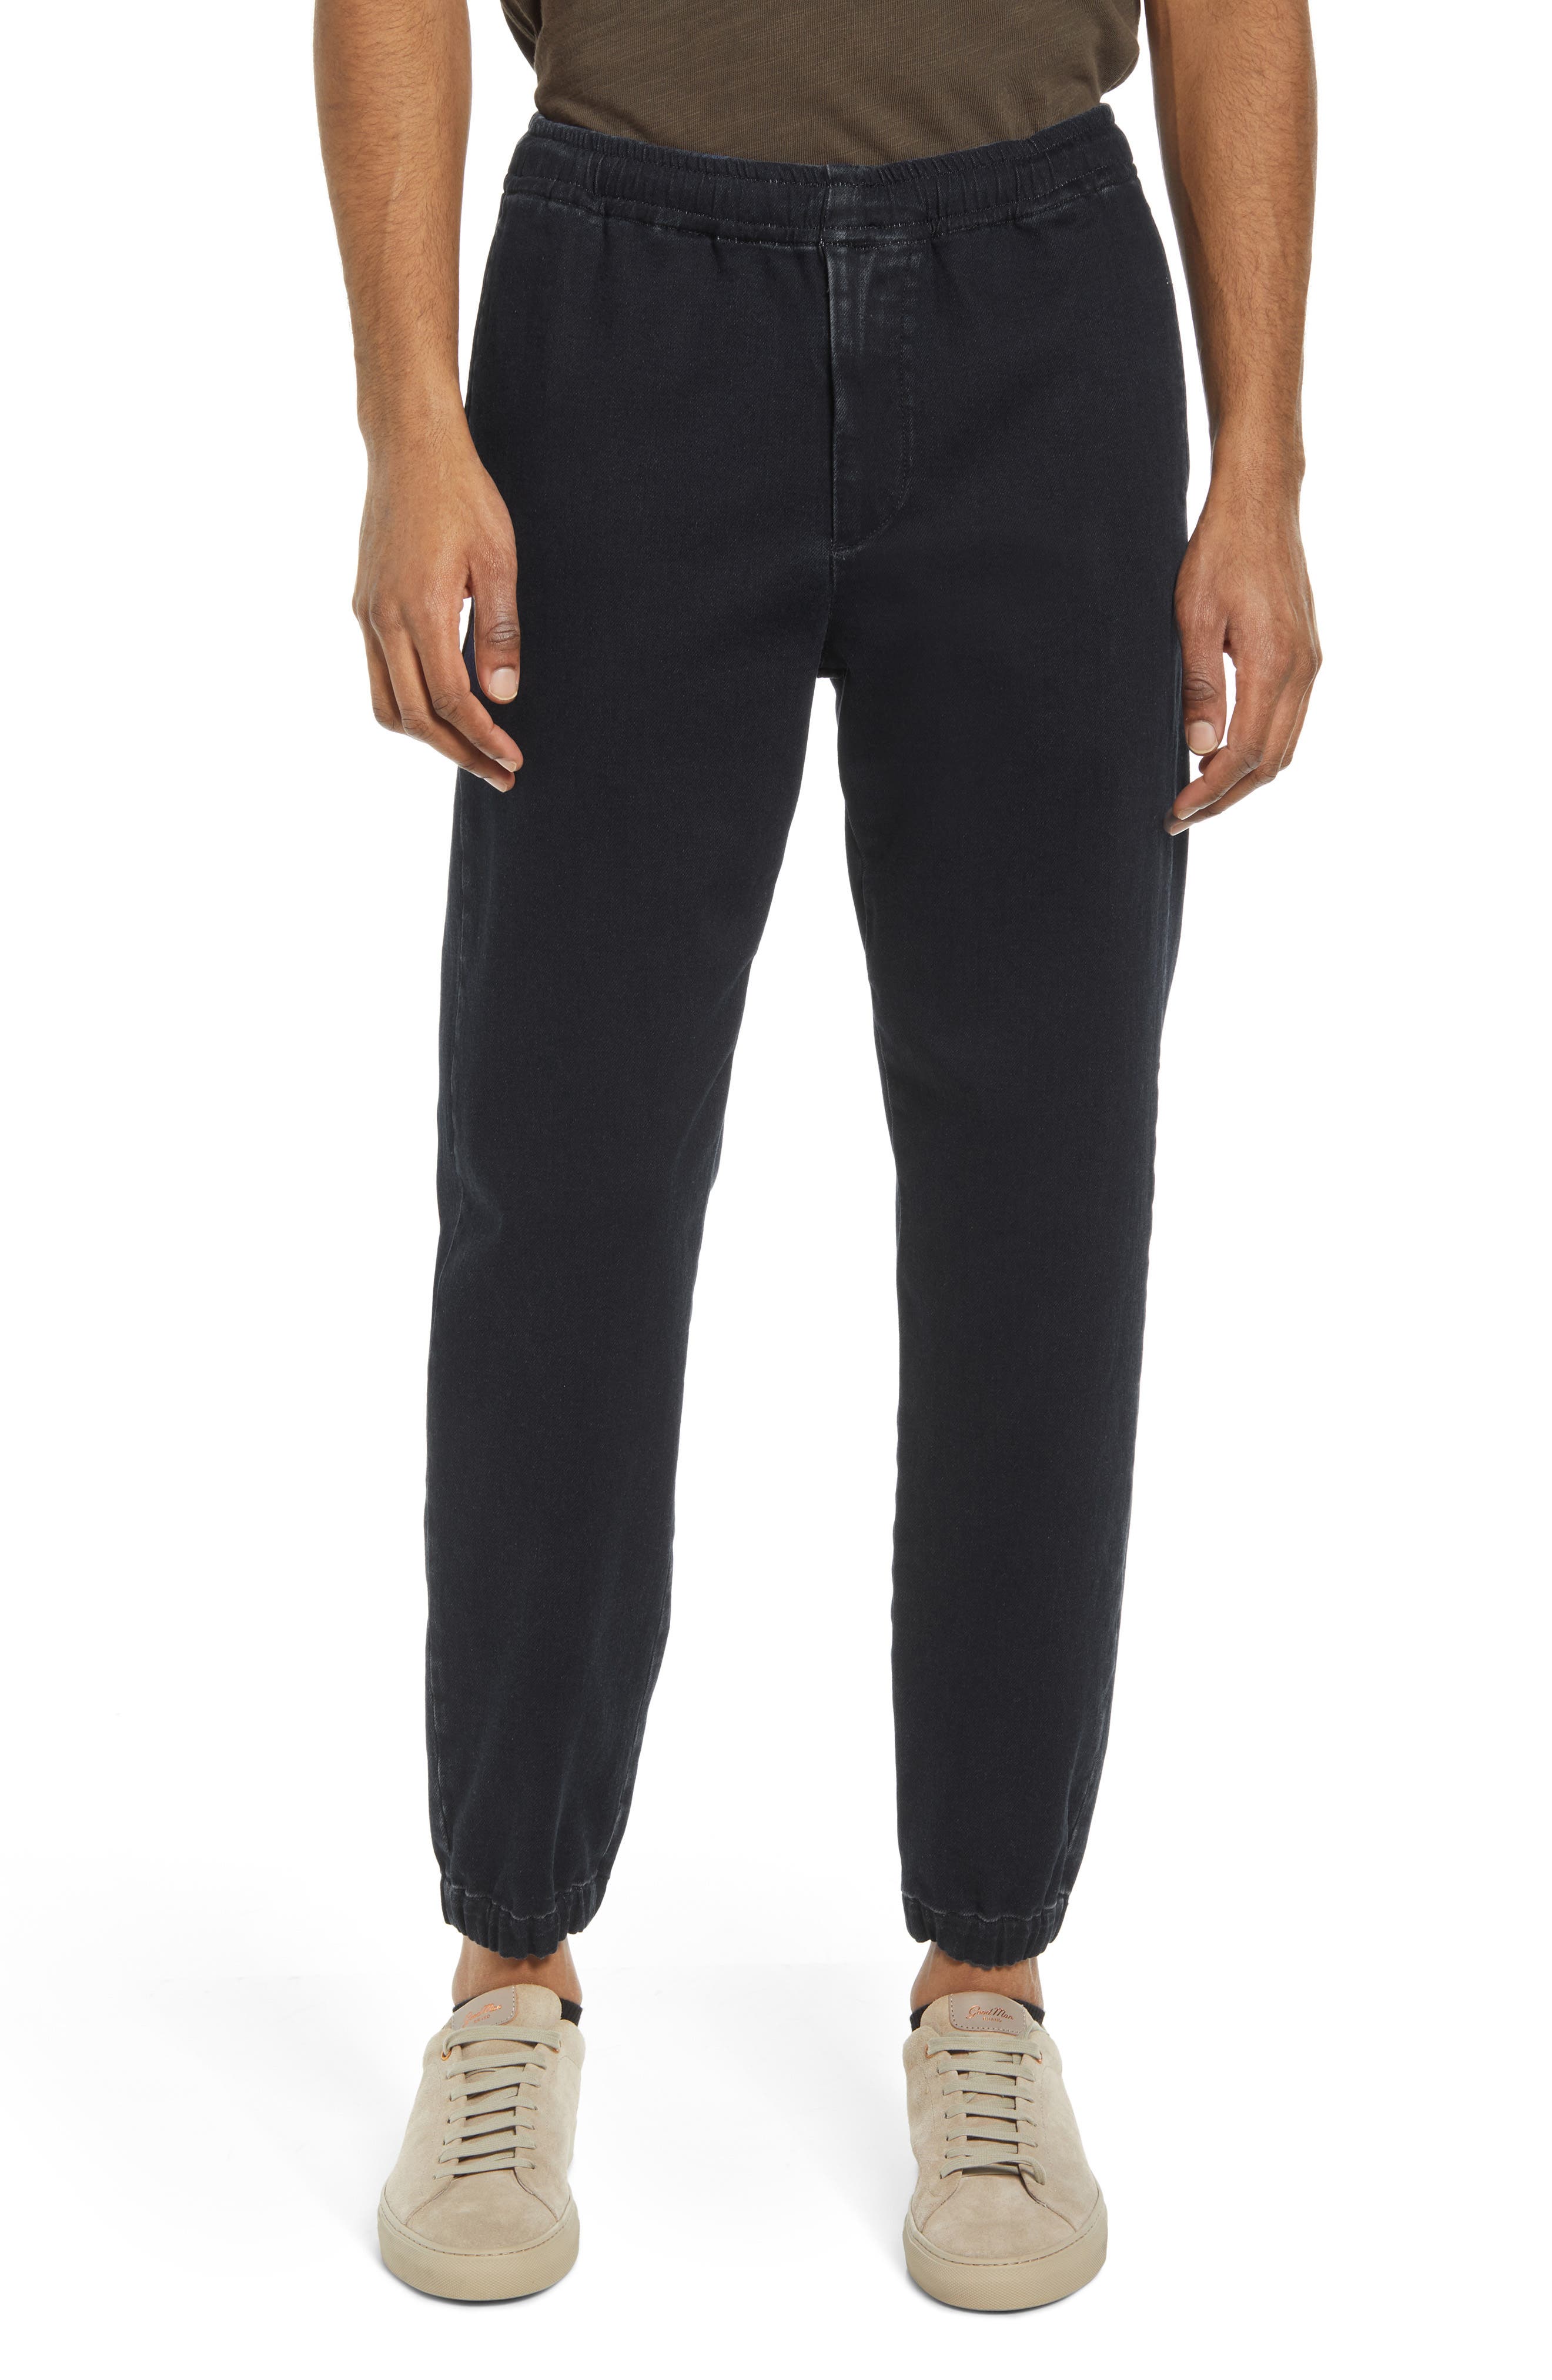 rag & bone Prospect Joggers in Bart at Nordstrom, Size X-Large